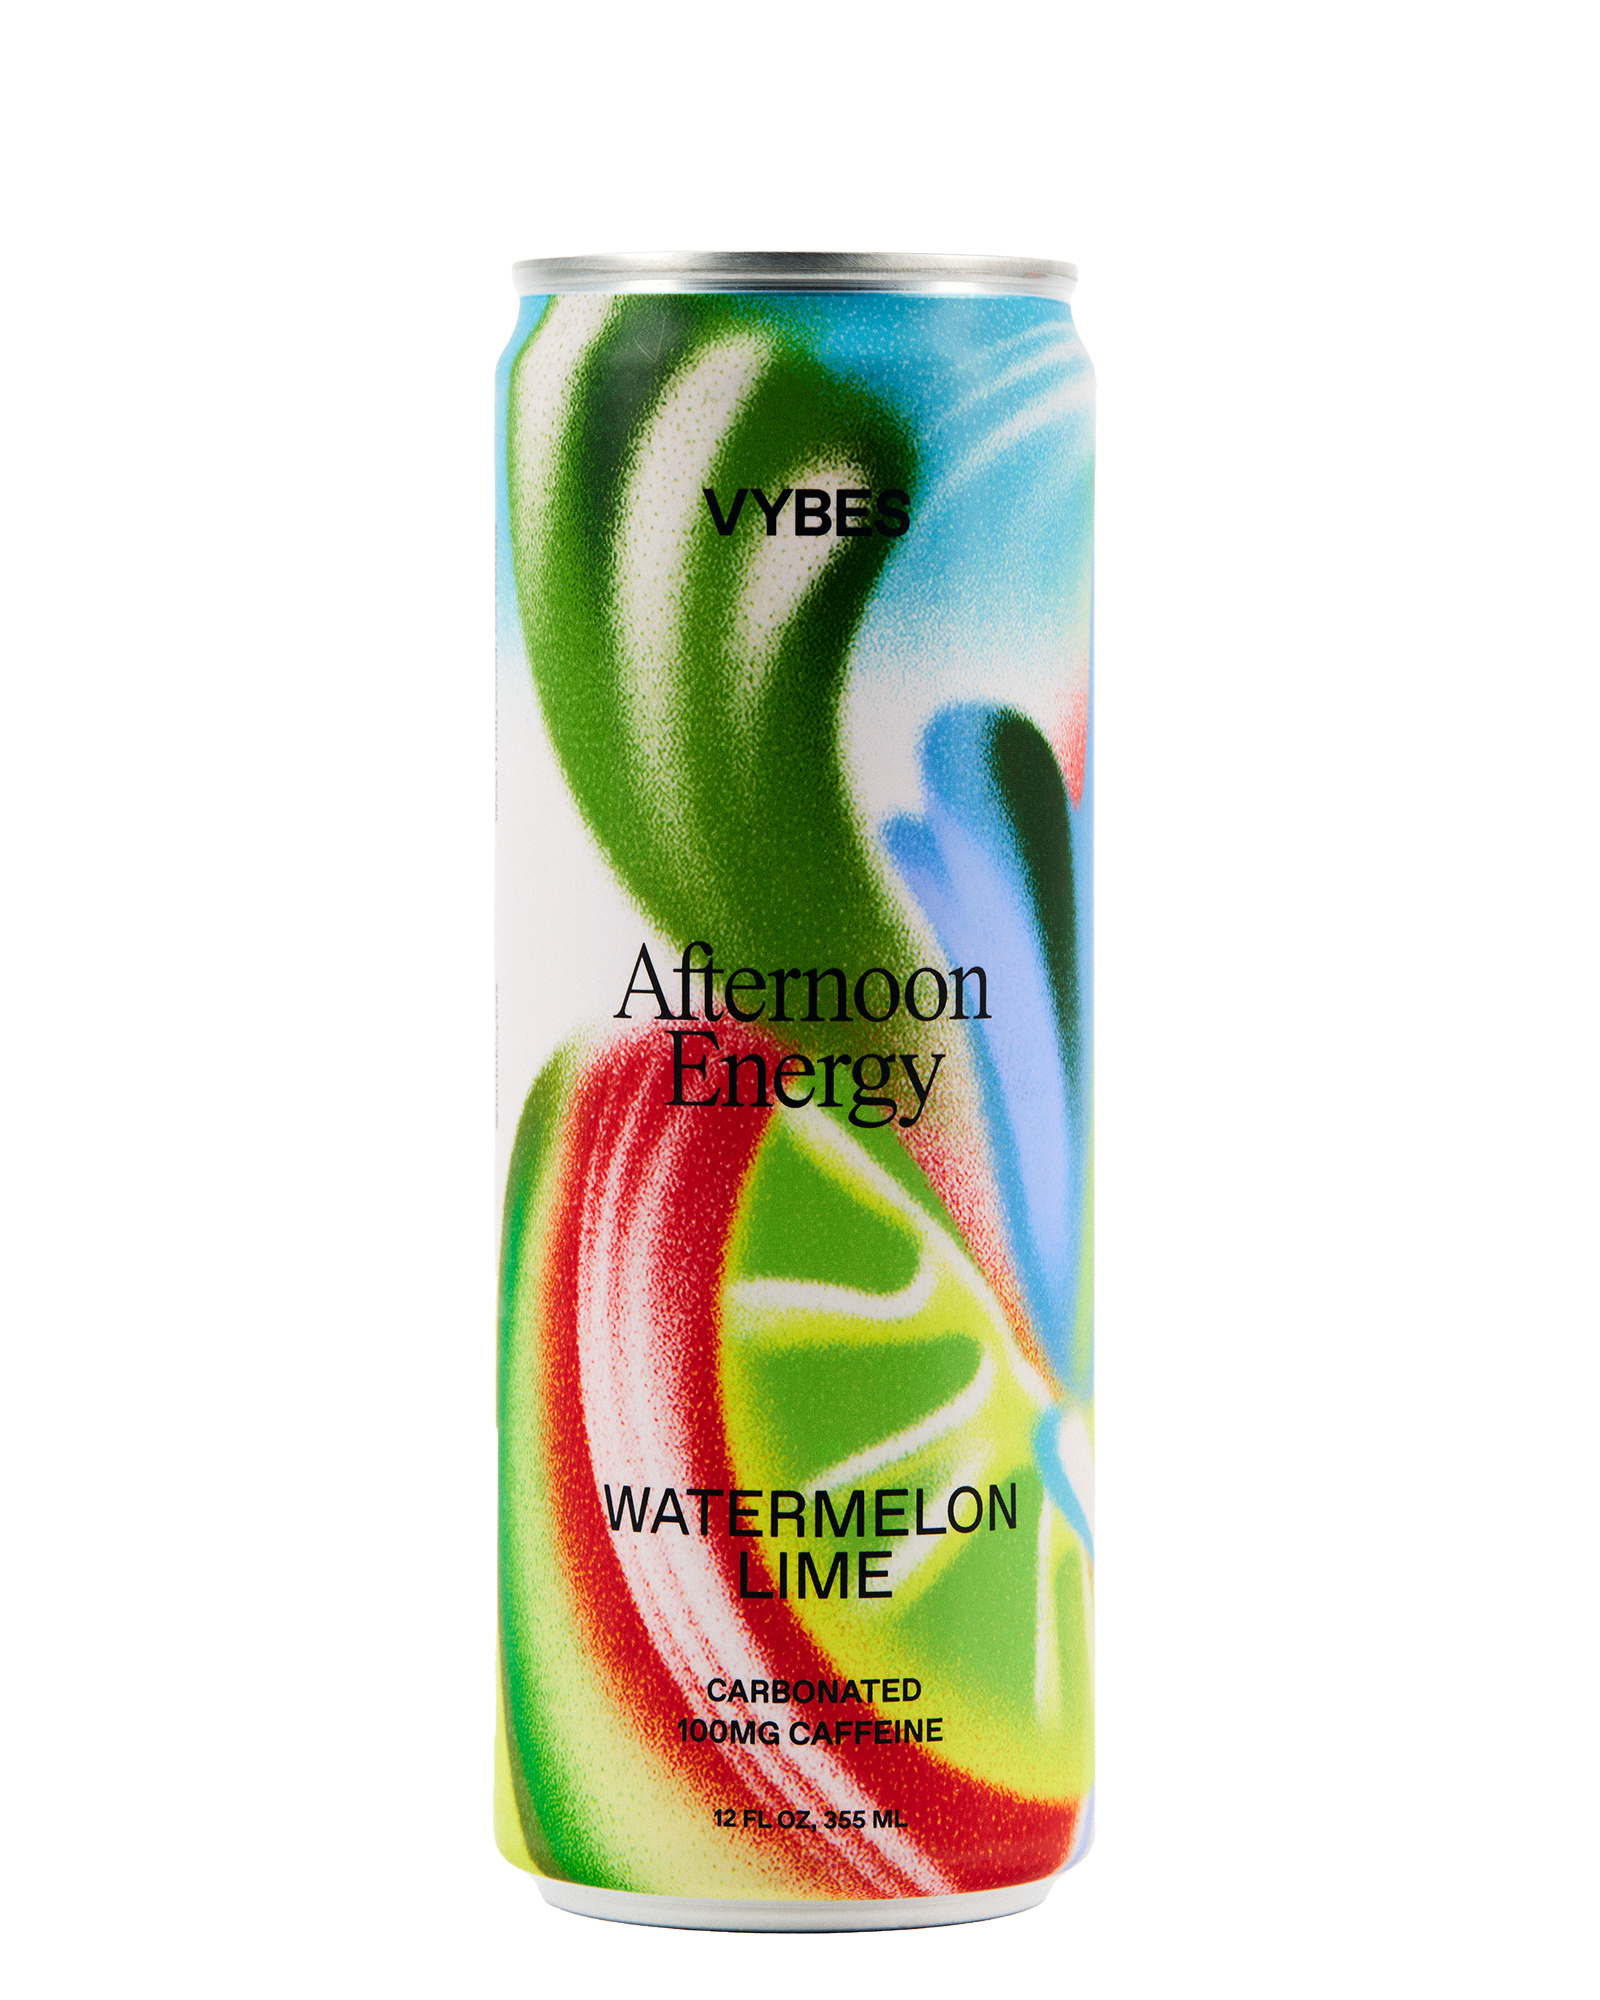 AFTERNOON ENERGY - Watermelon Lime